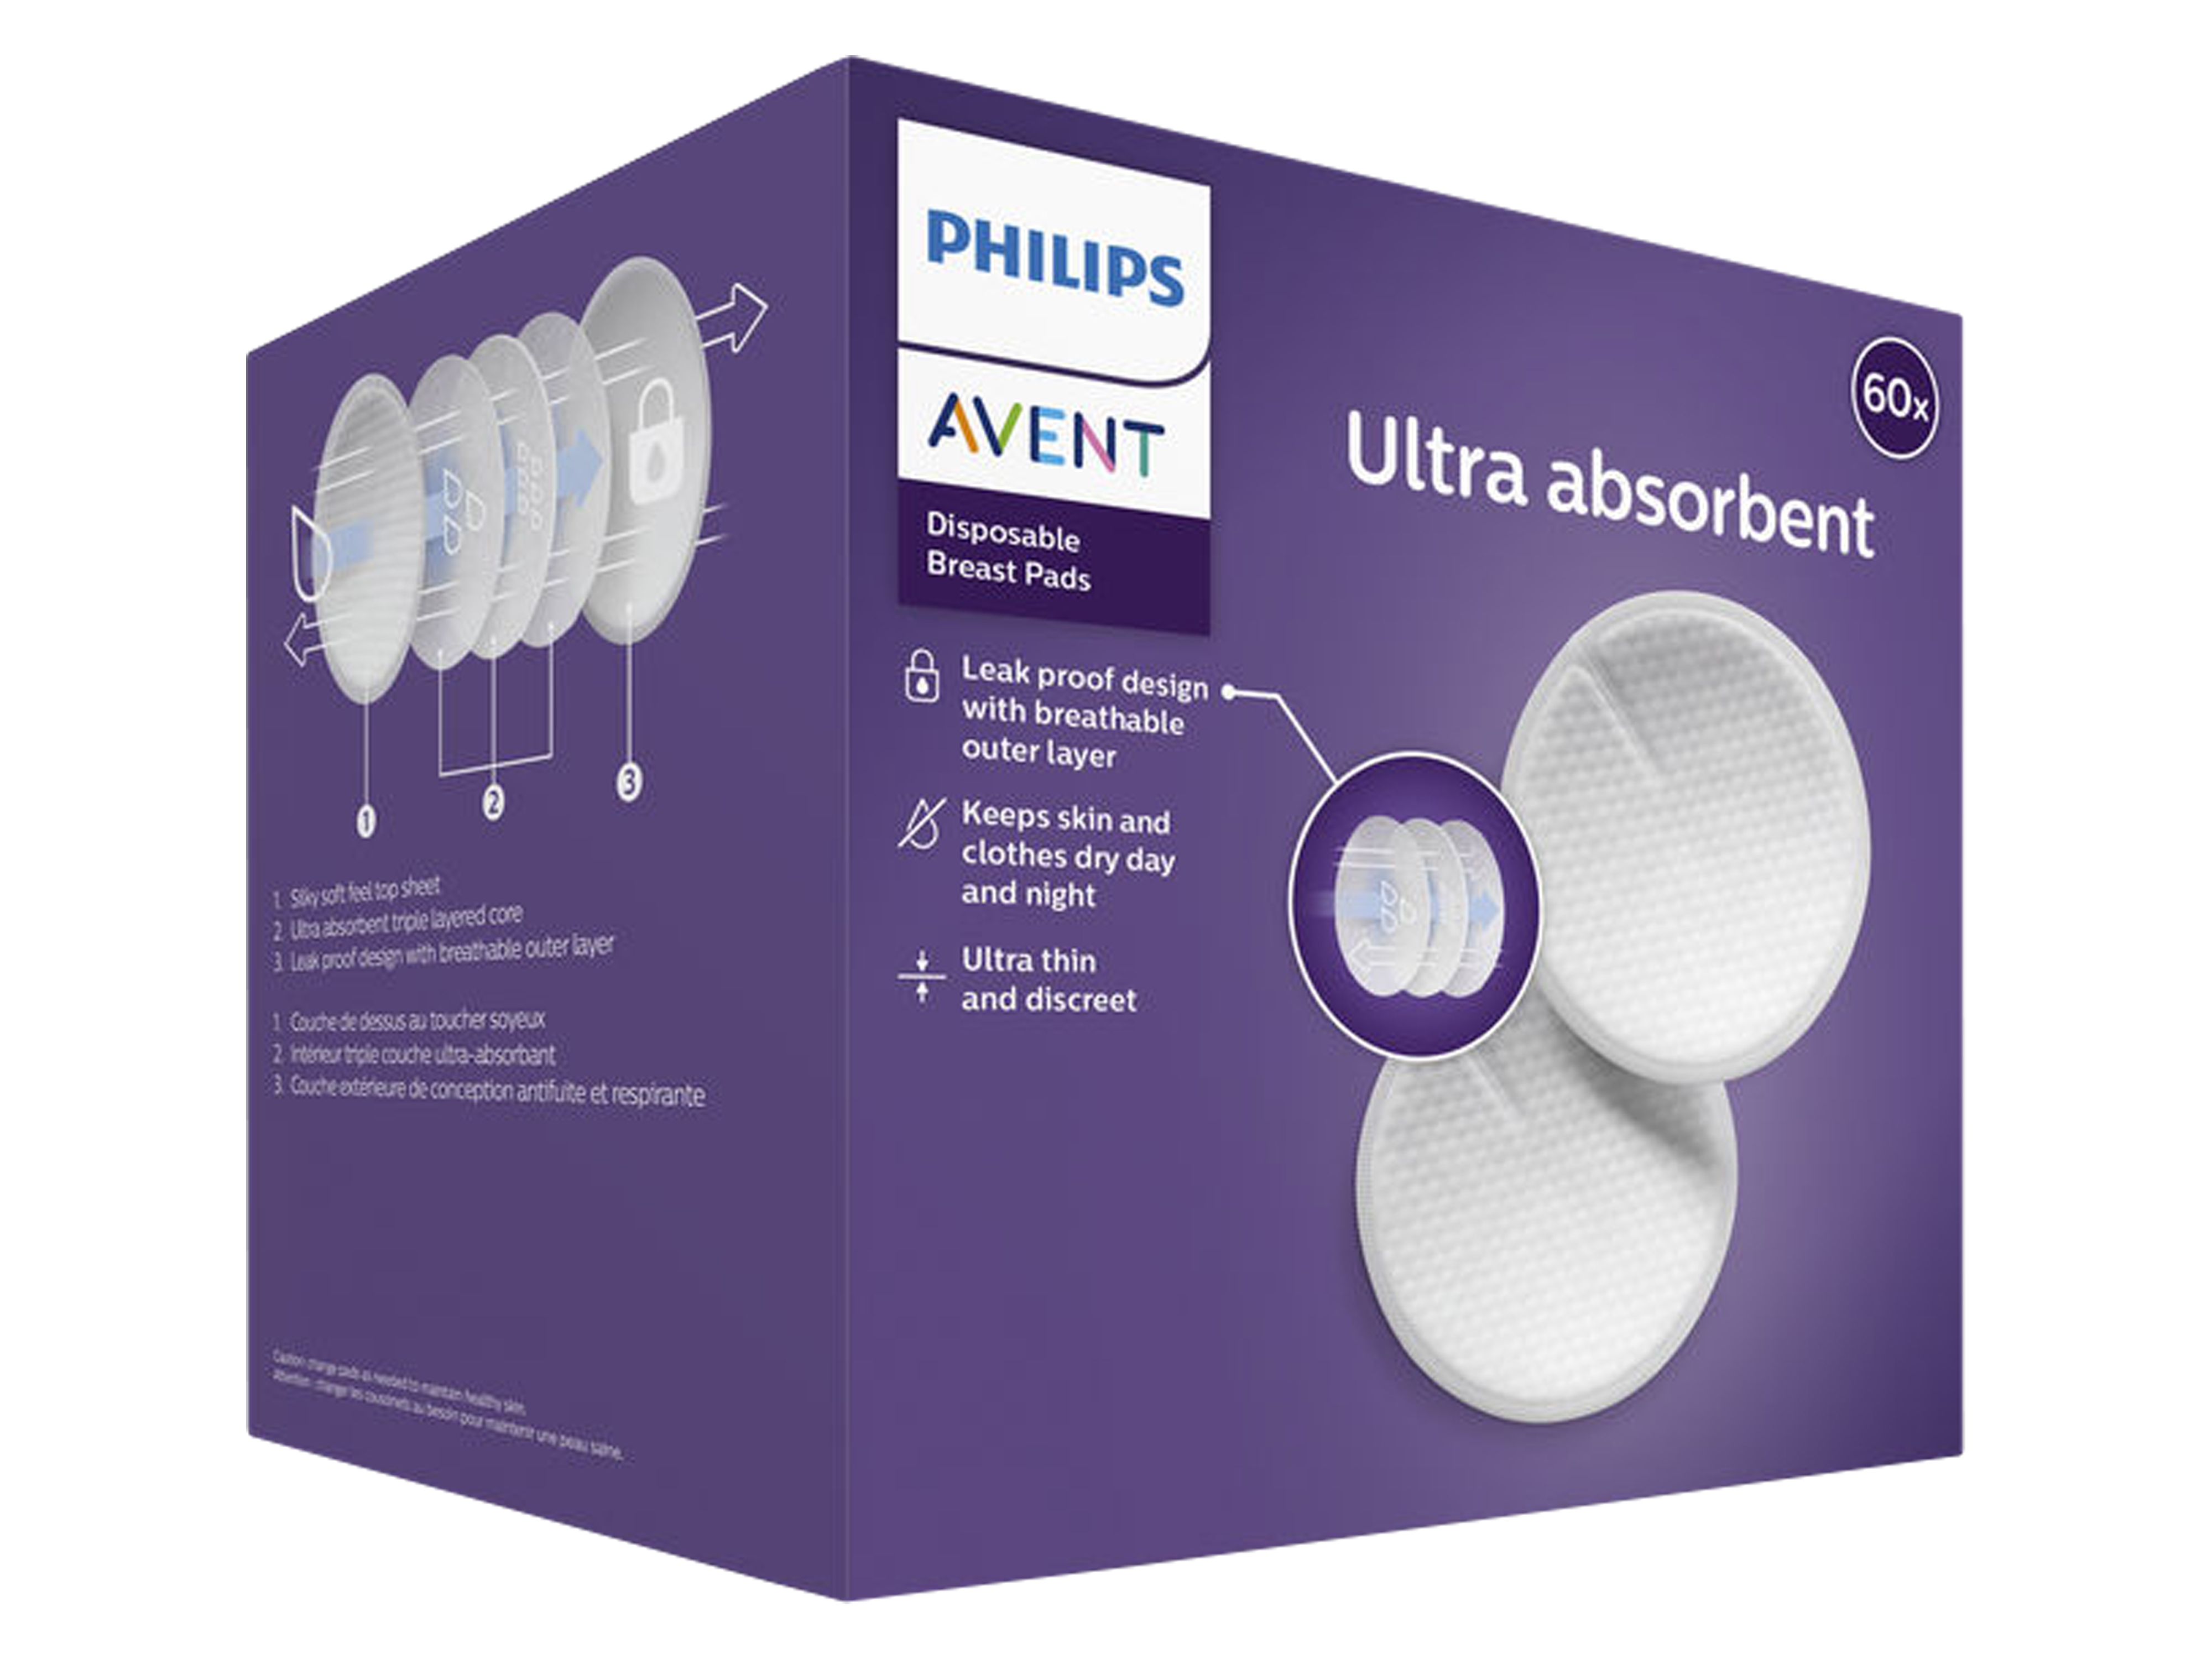 Philips Avent Max Comfort Breast Pads, 60 stk.